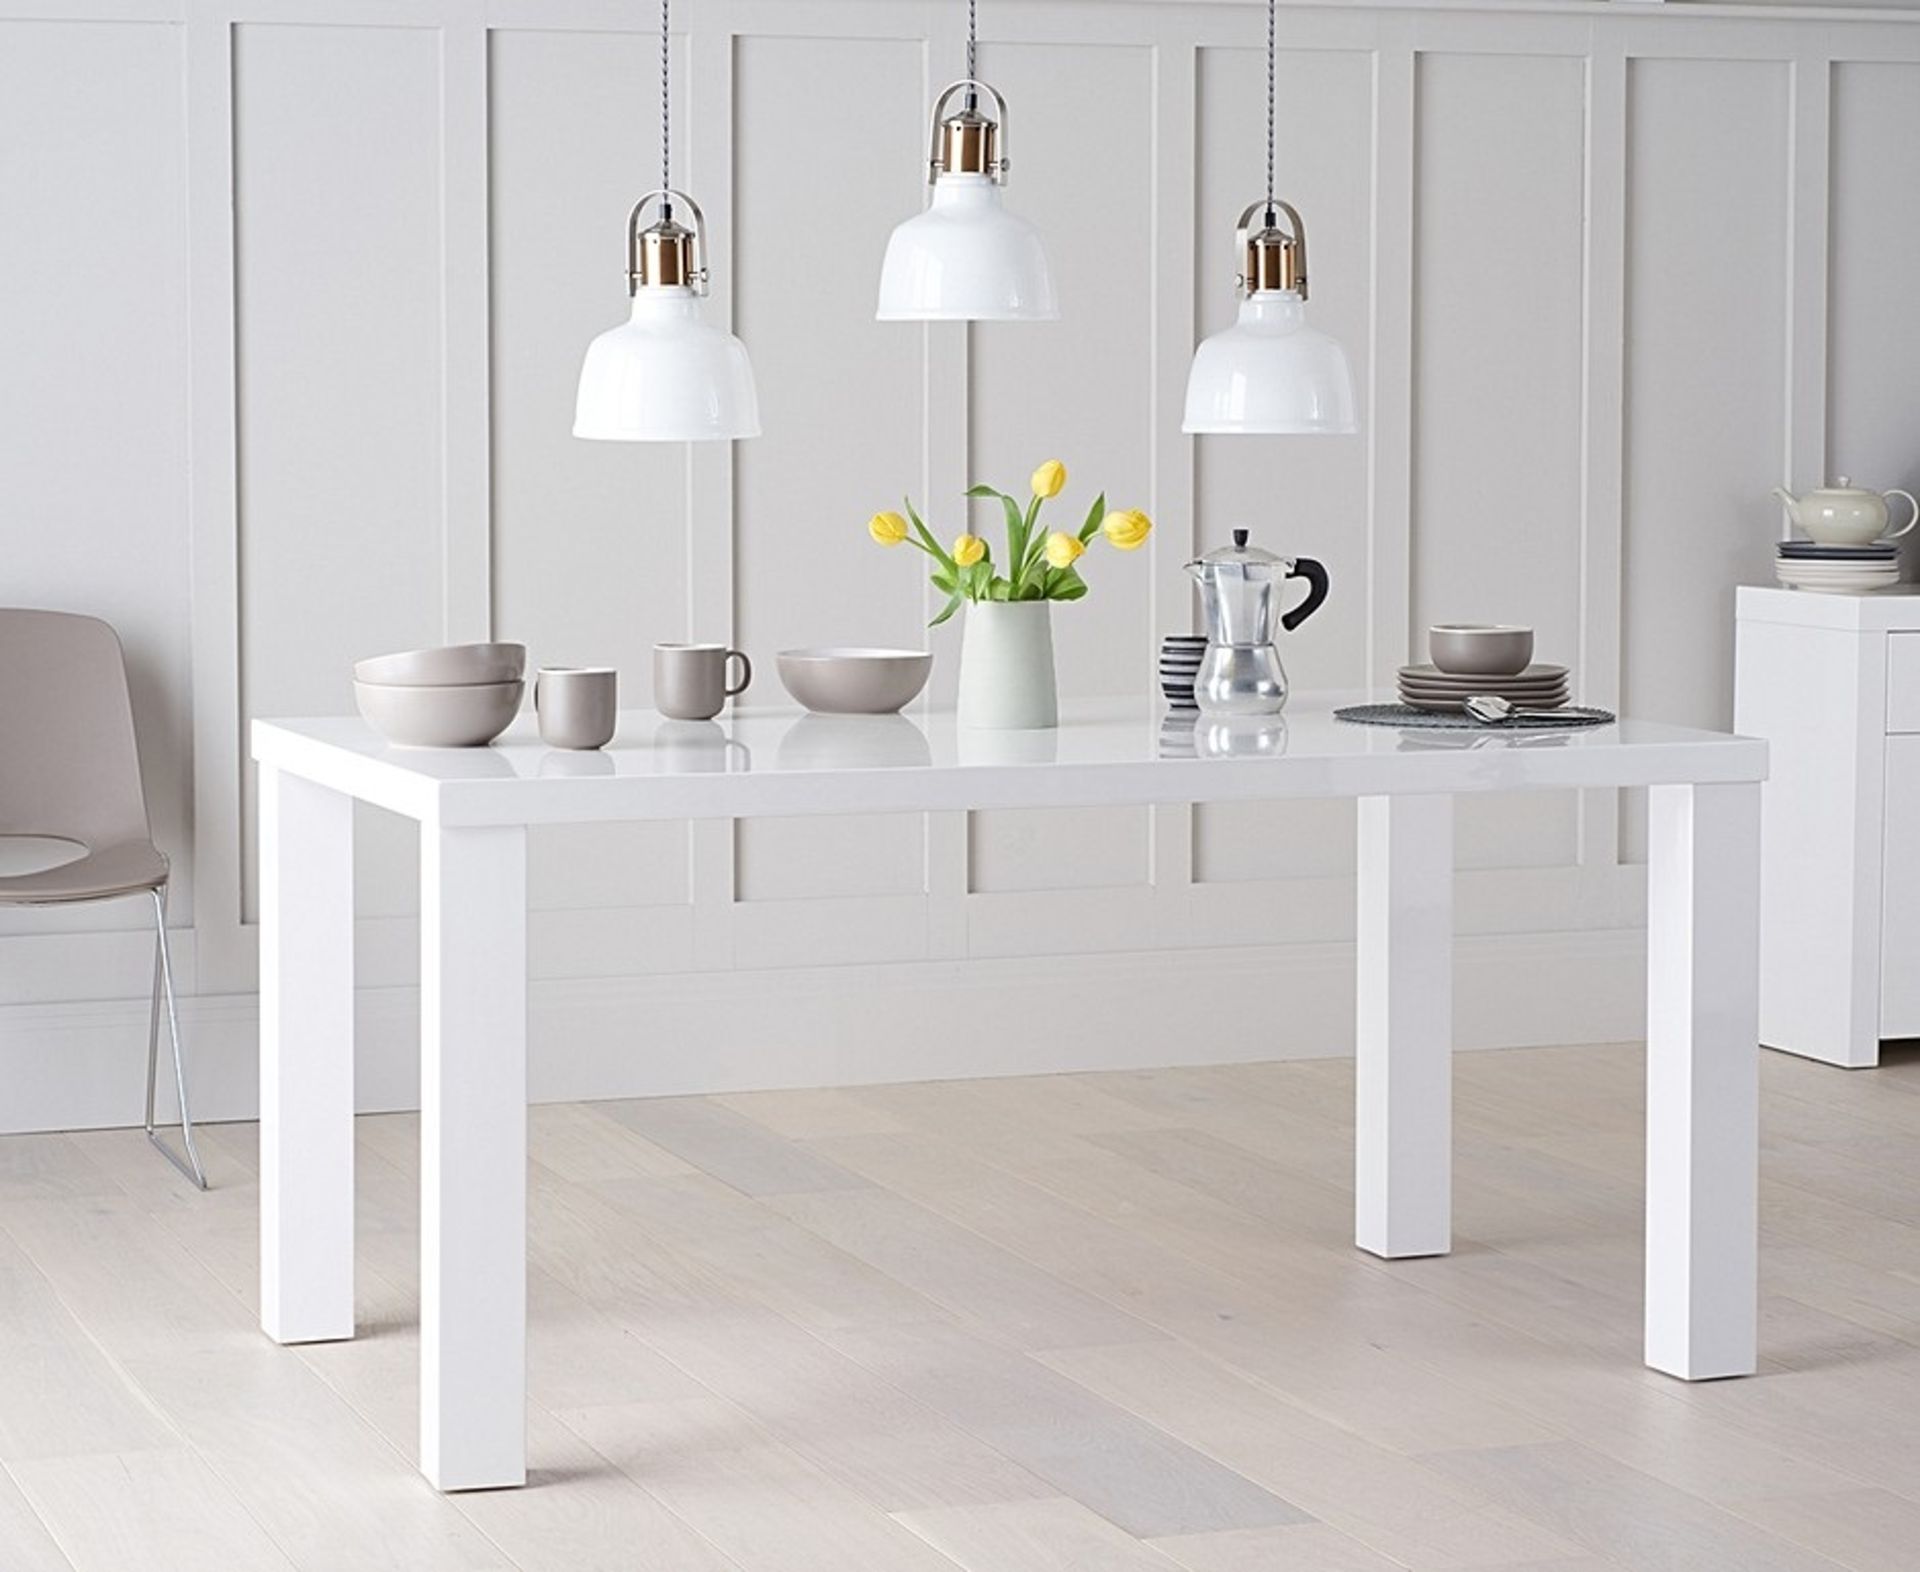 Atlanta 160cm White High Gloss Dining Table The Atlanta collection is all about practicality and